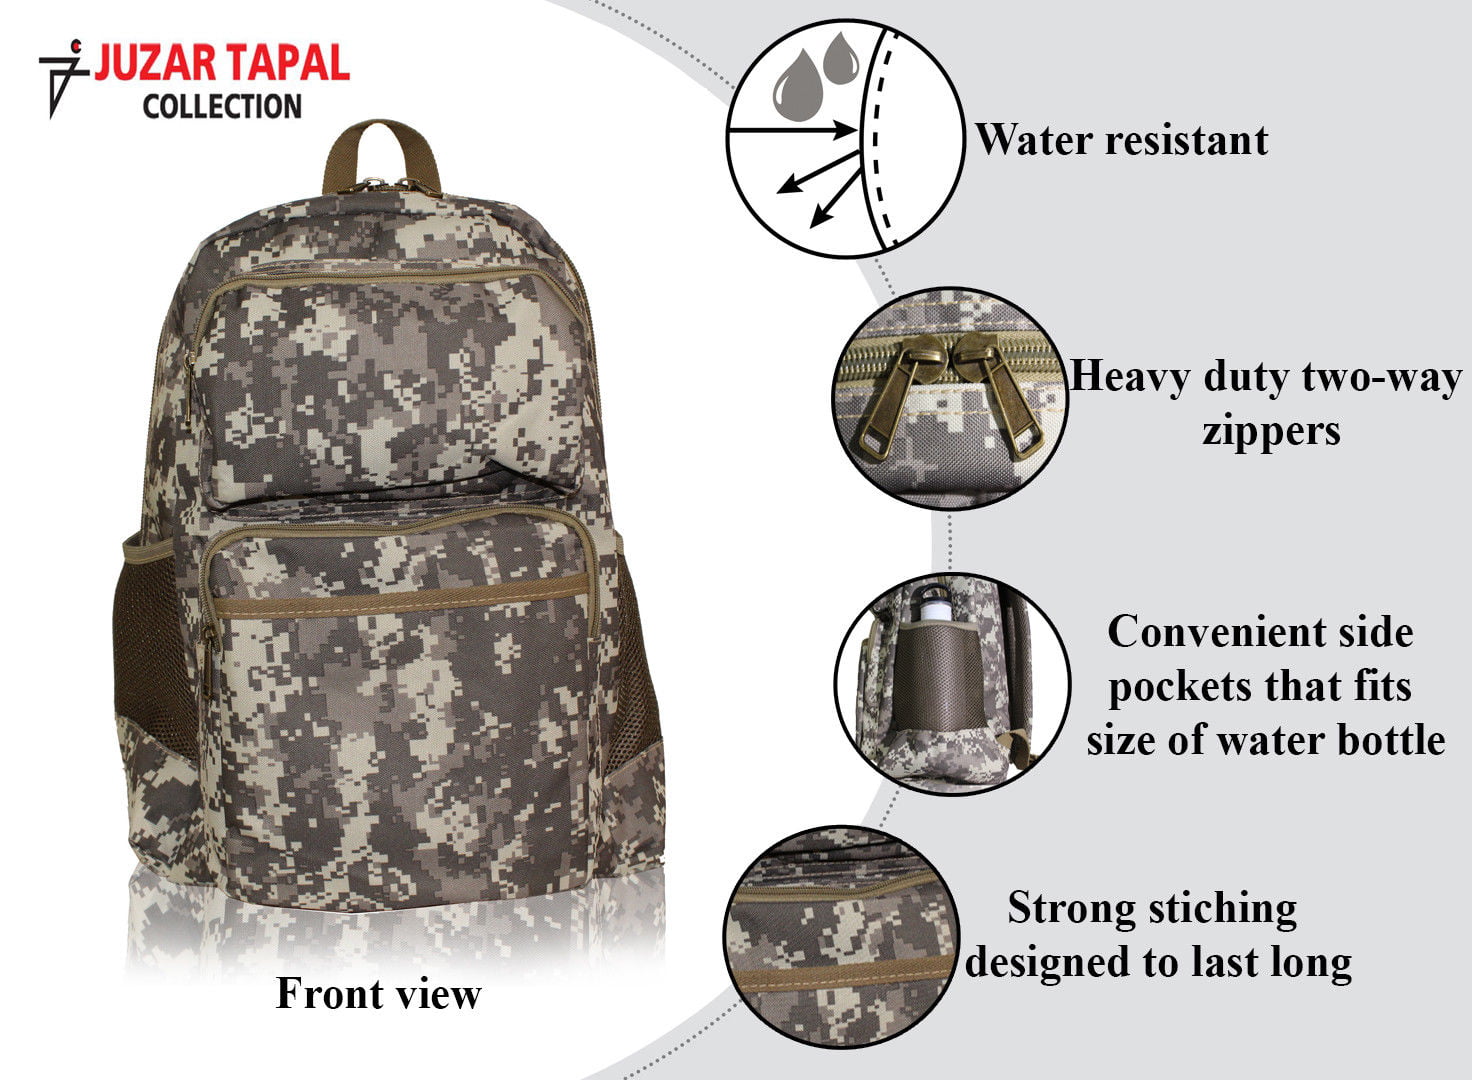 Laptop Computer Backpack Rucksack Bag Camouflage Army Military Luggage School 